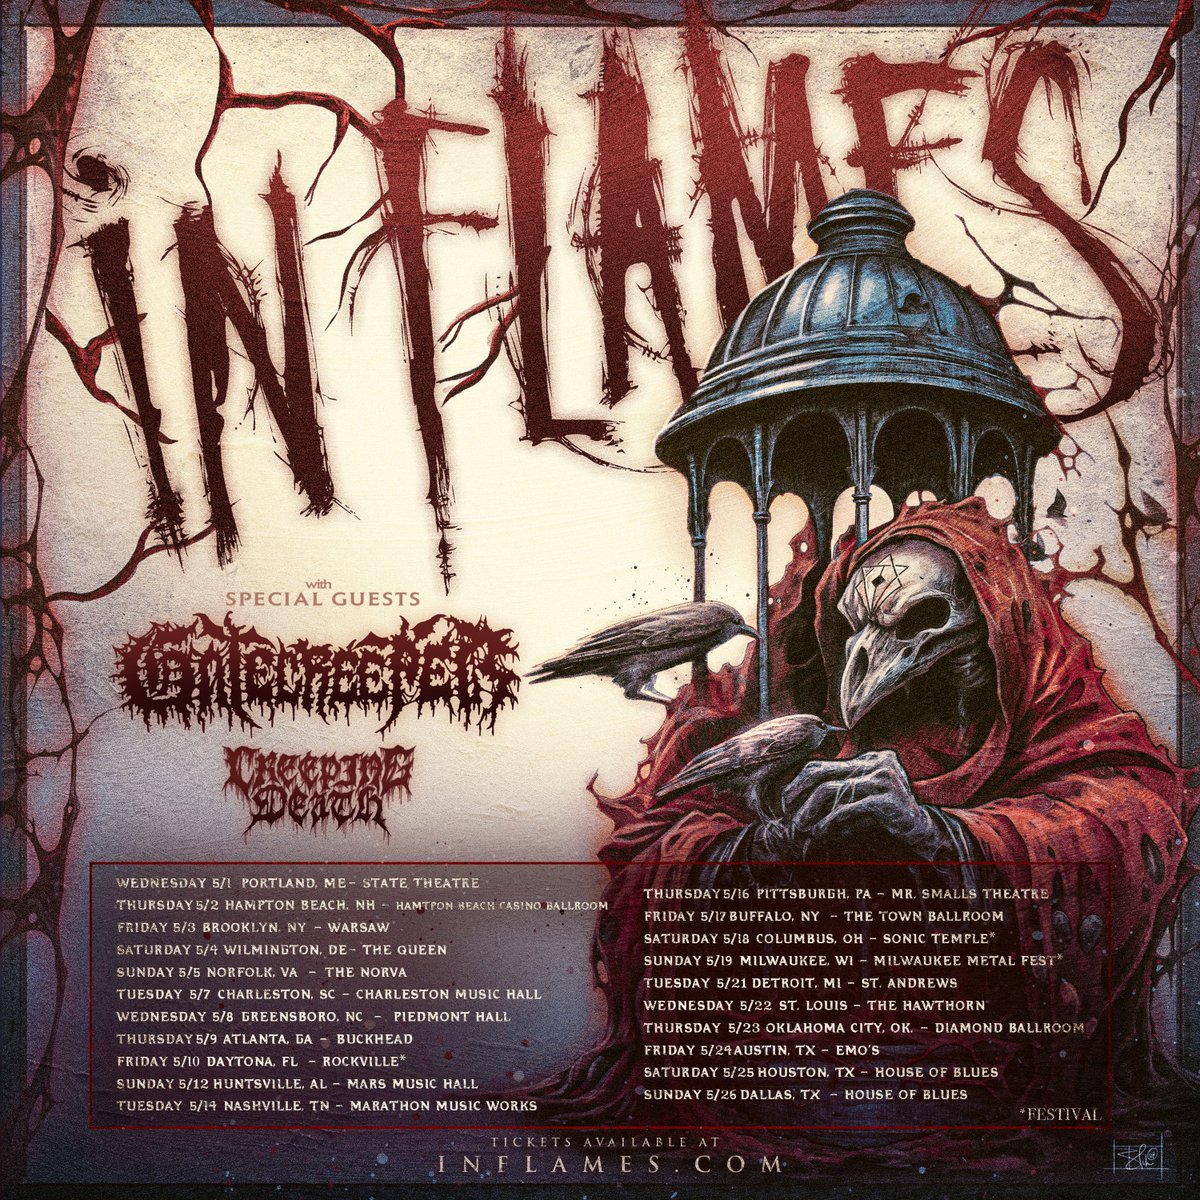 We are hitting the road with @InFlames_SWE and @CreepingDeathtx. Tickets on sale Friday at 10am at GATECREEPER.COM. More tour dates coming soon...